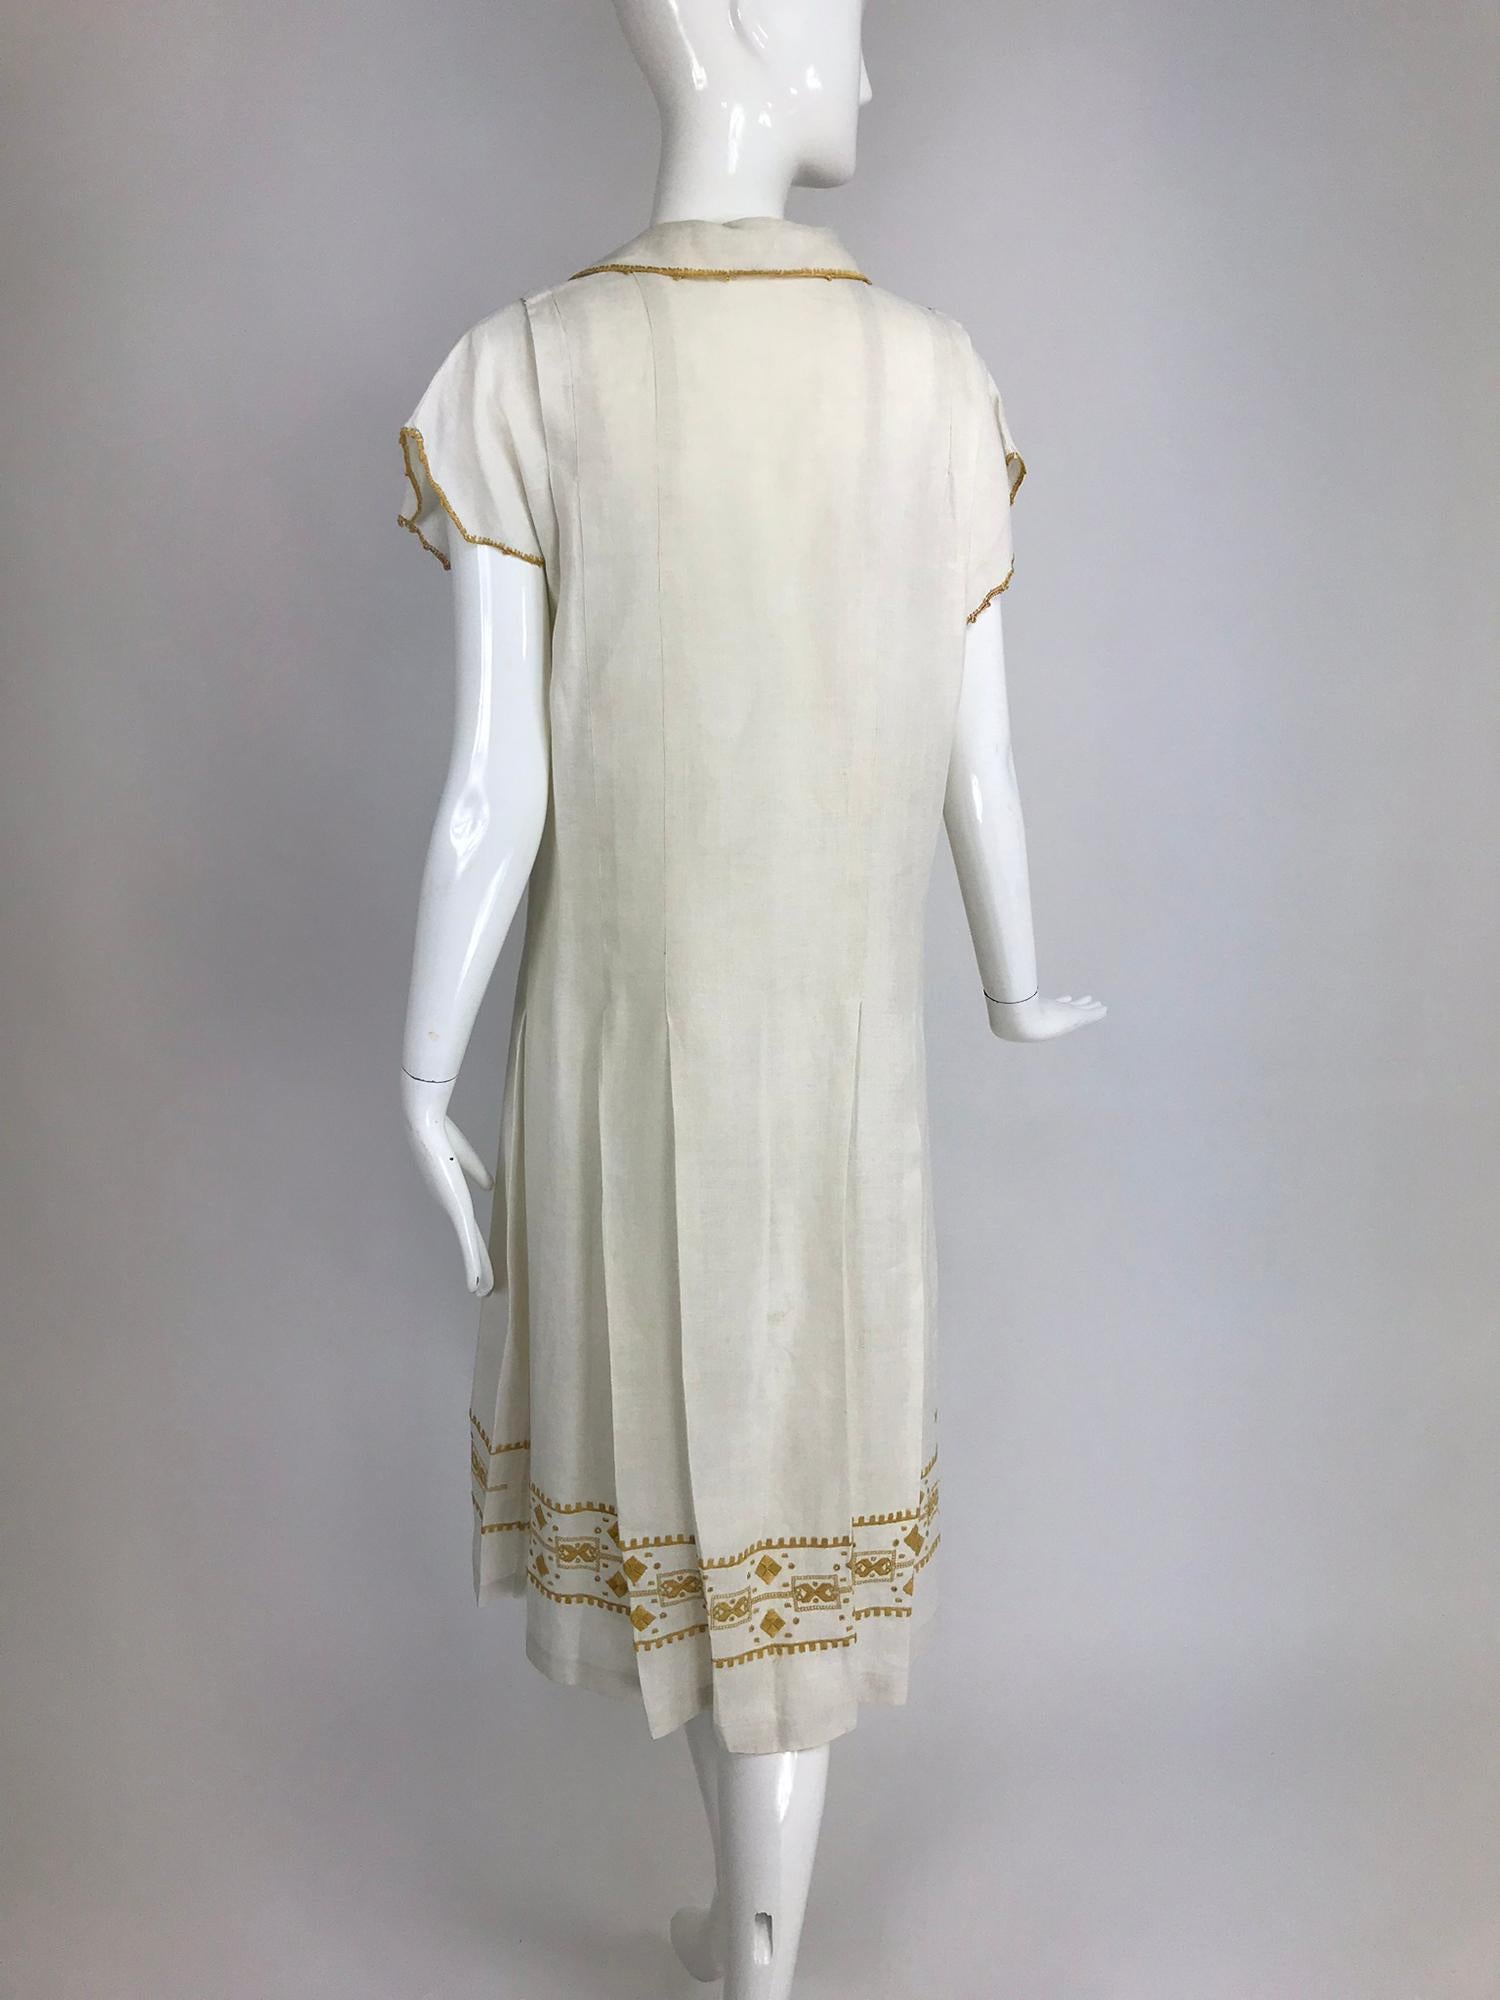 Vintage 1920s Hand Embroidered Arts and Crafts Linen Day Dress 1